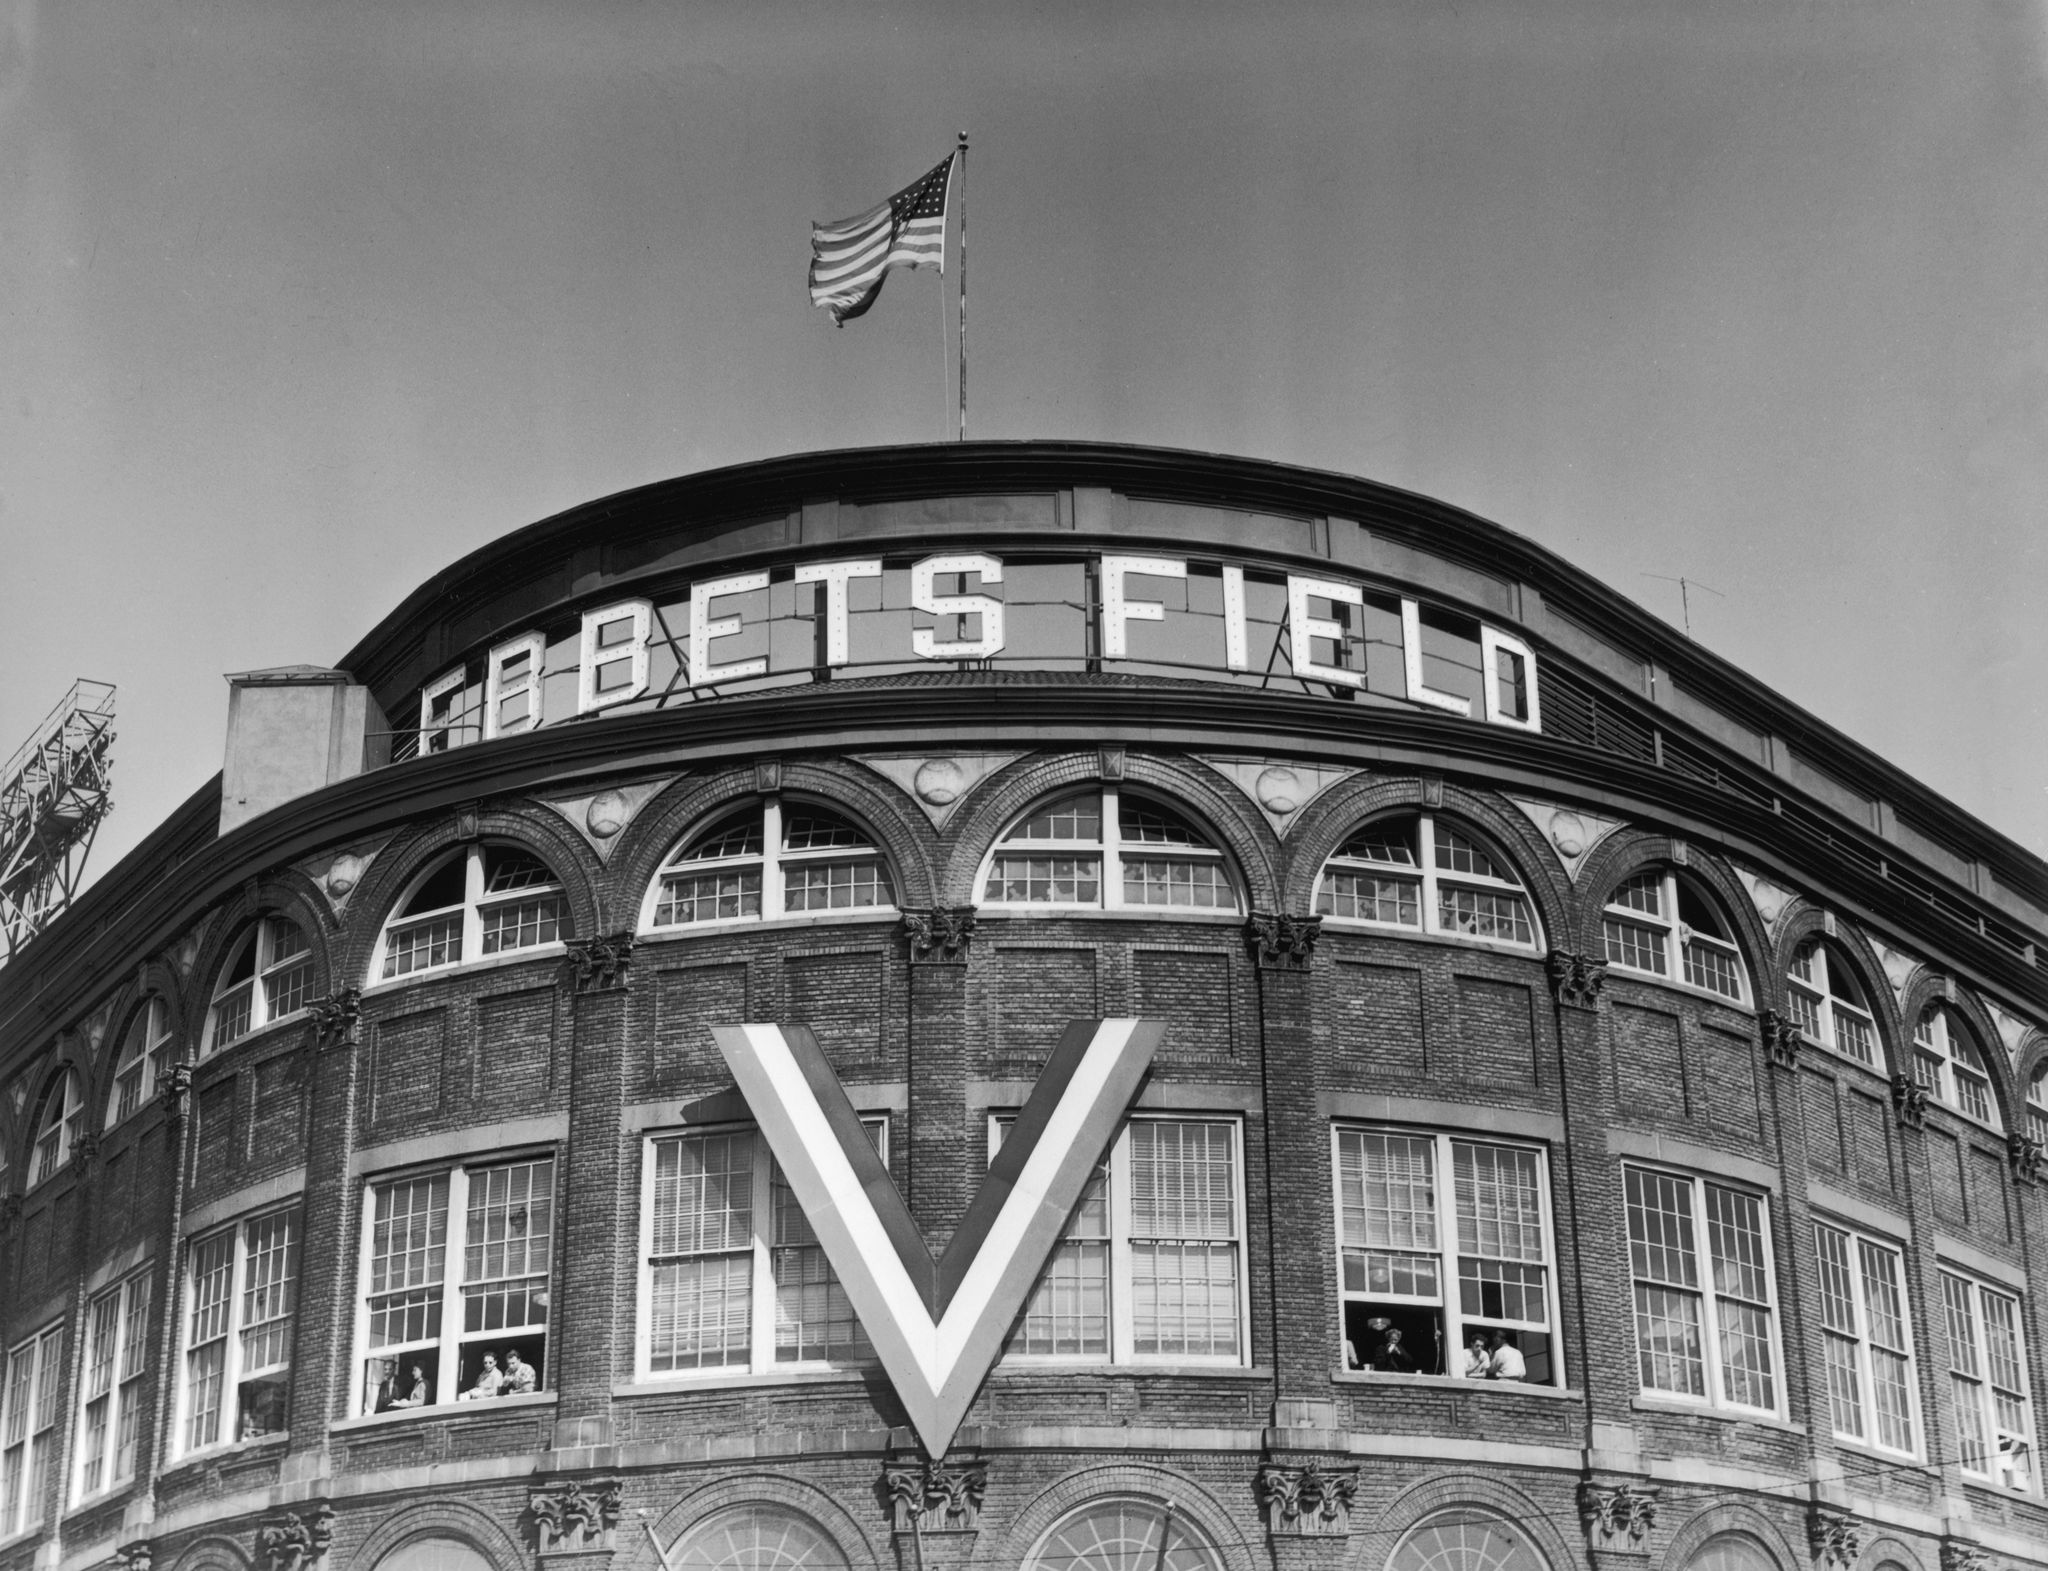 circa 1945 view of the curved exterior rotunda at the entrance to ebbets field, home of the brooklyn dodgers, in the flatbush section of brooklyn, new york city a v for victory, hangs on the facade photo by hirzgetty images